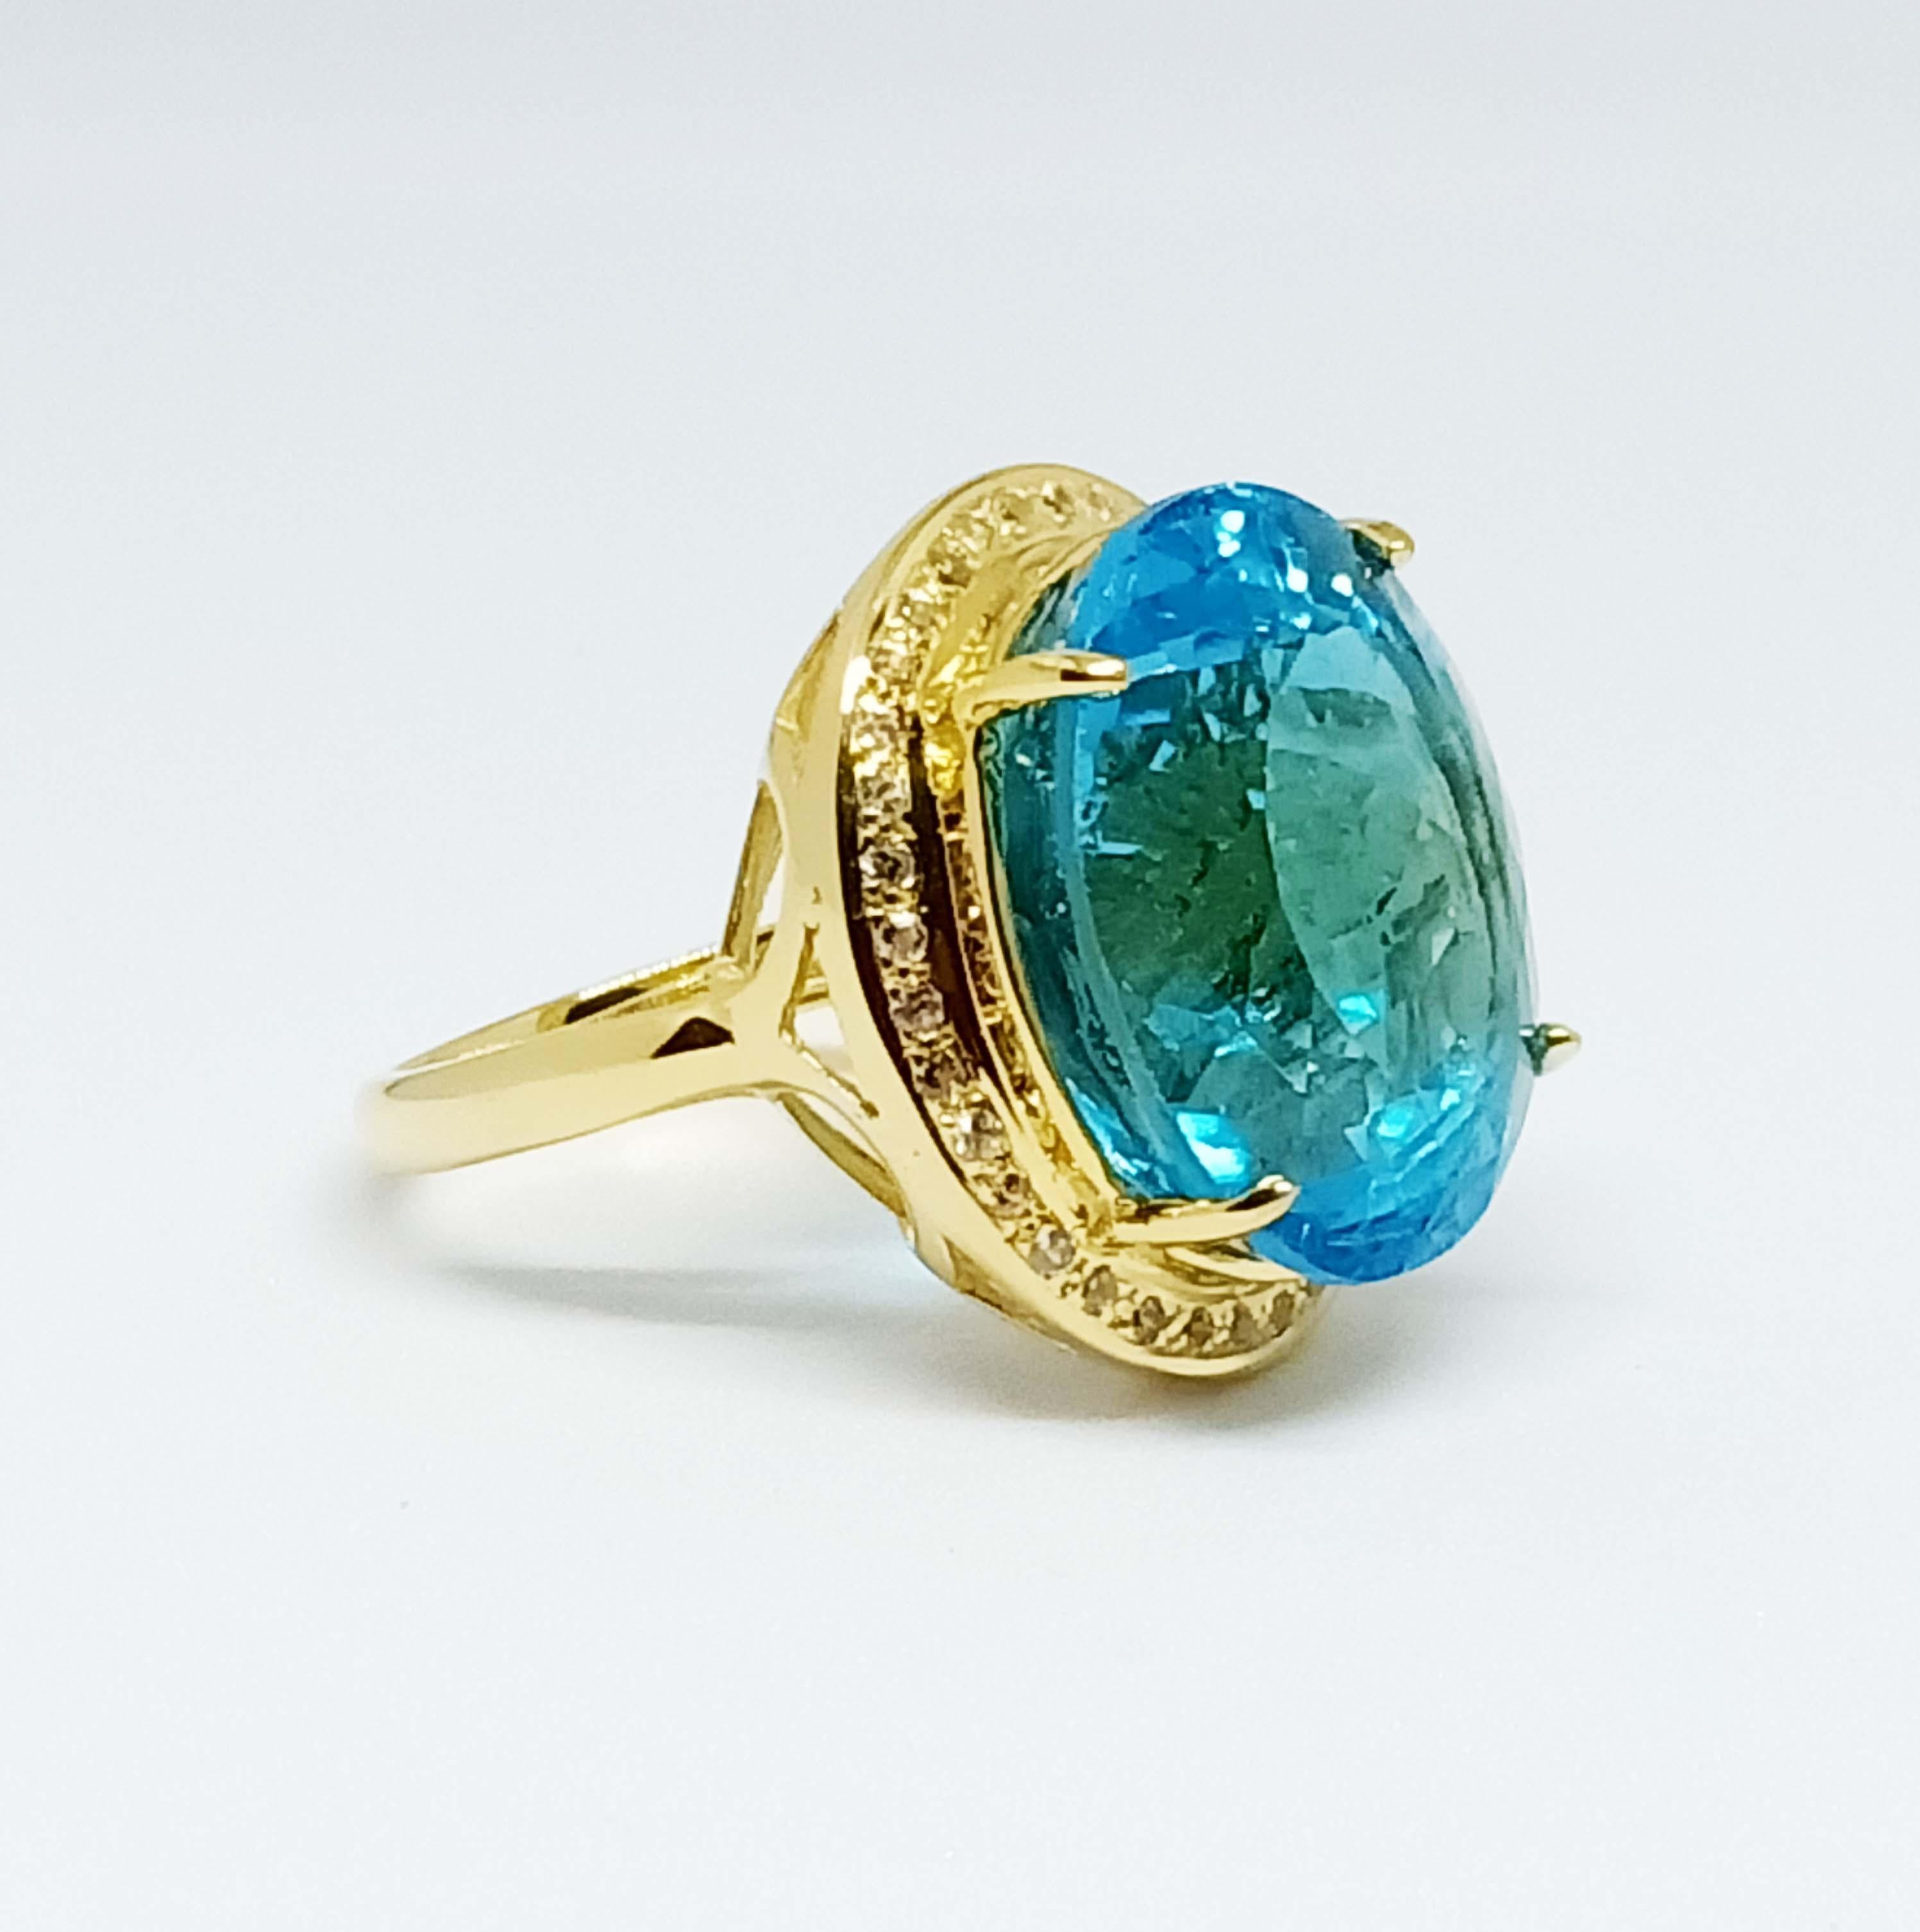 25.19 cts Swiss BlueTopaz Sterling Silver In 18K Gold Plated For Sale 2